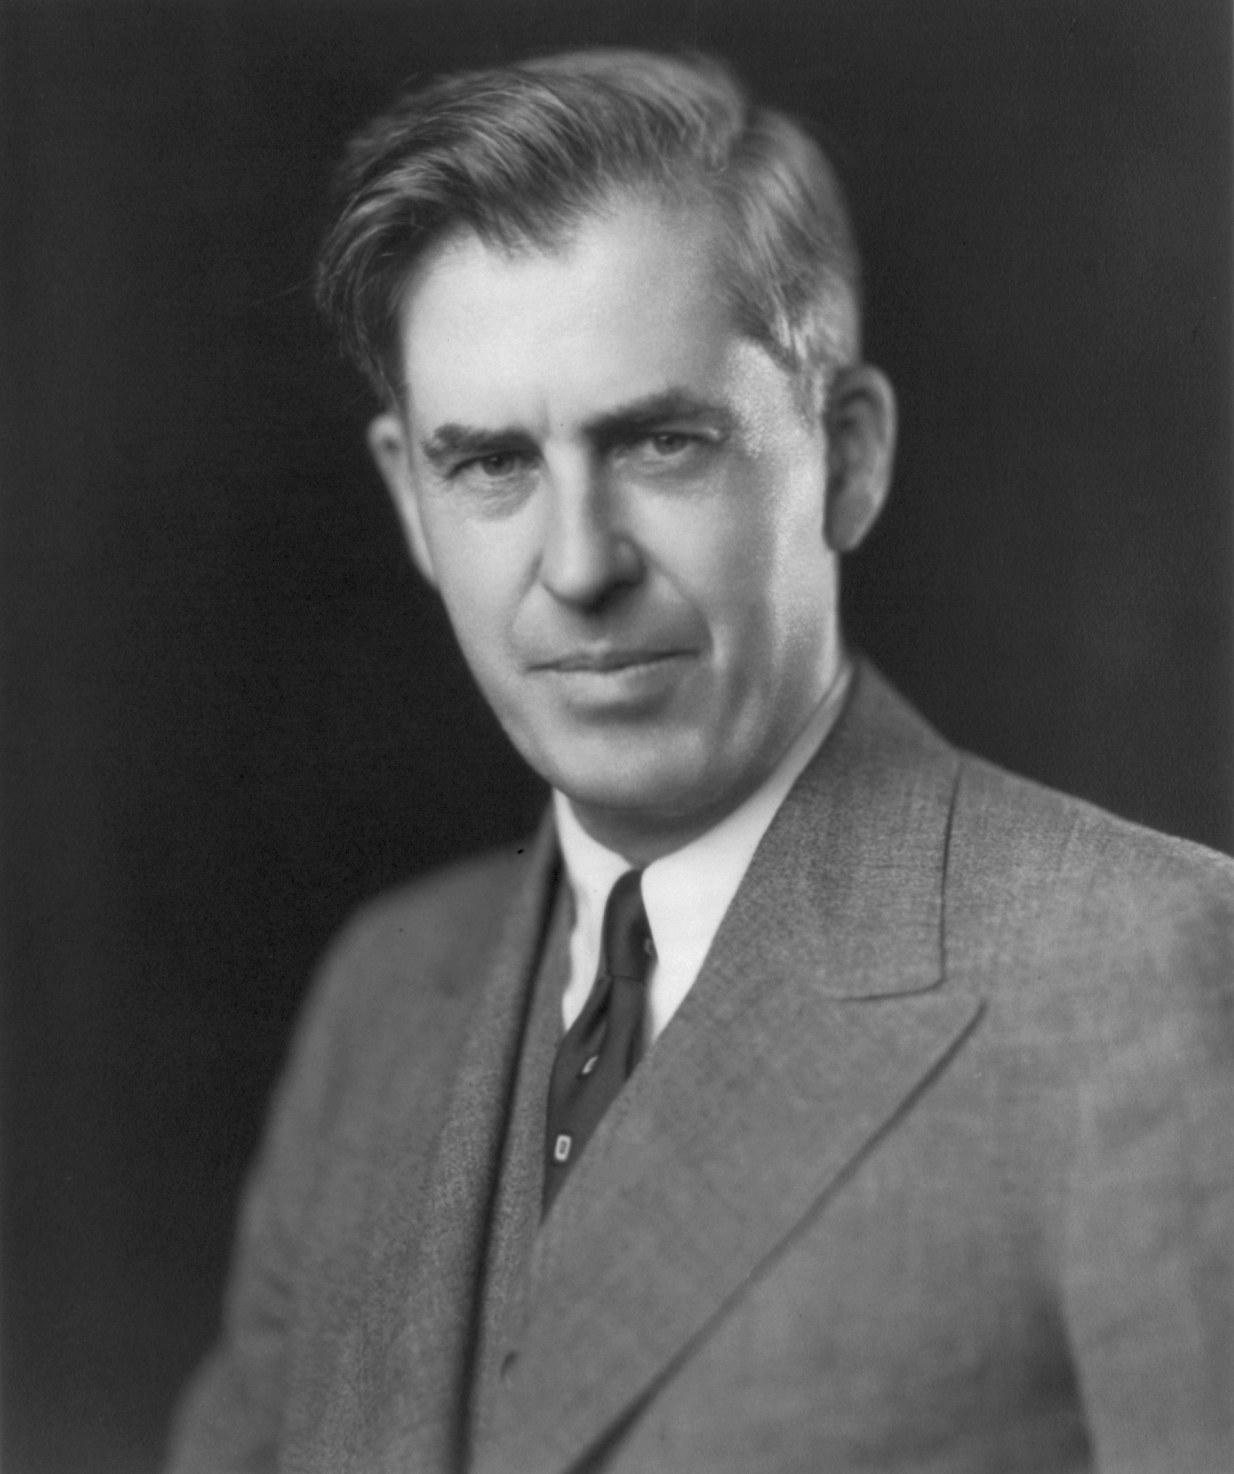 Colonel Henry Wallace Johnston